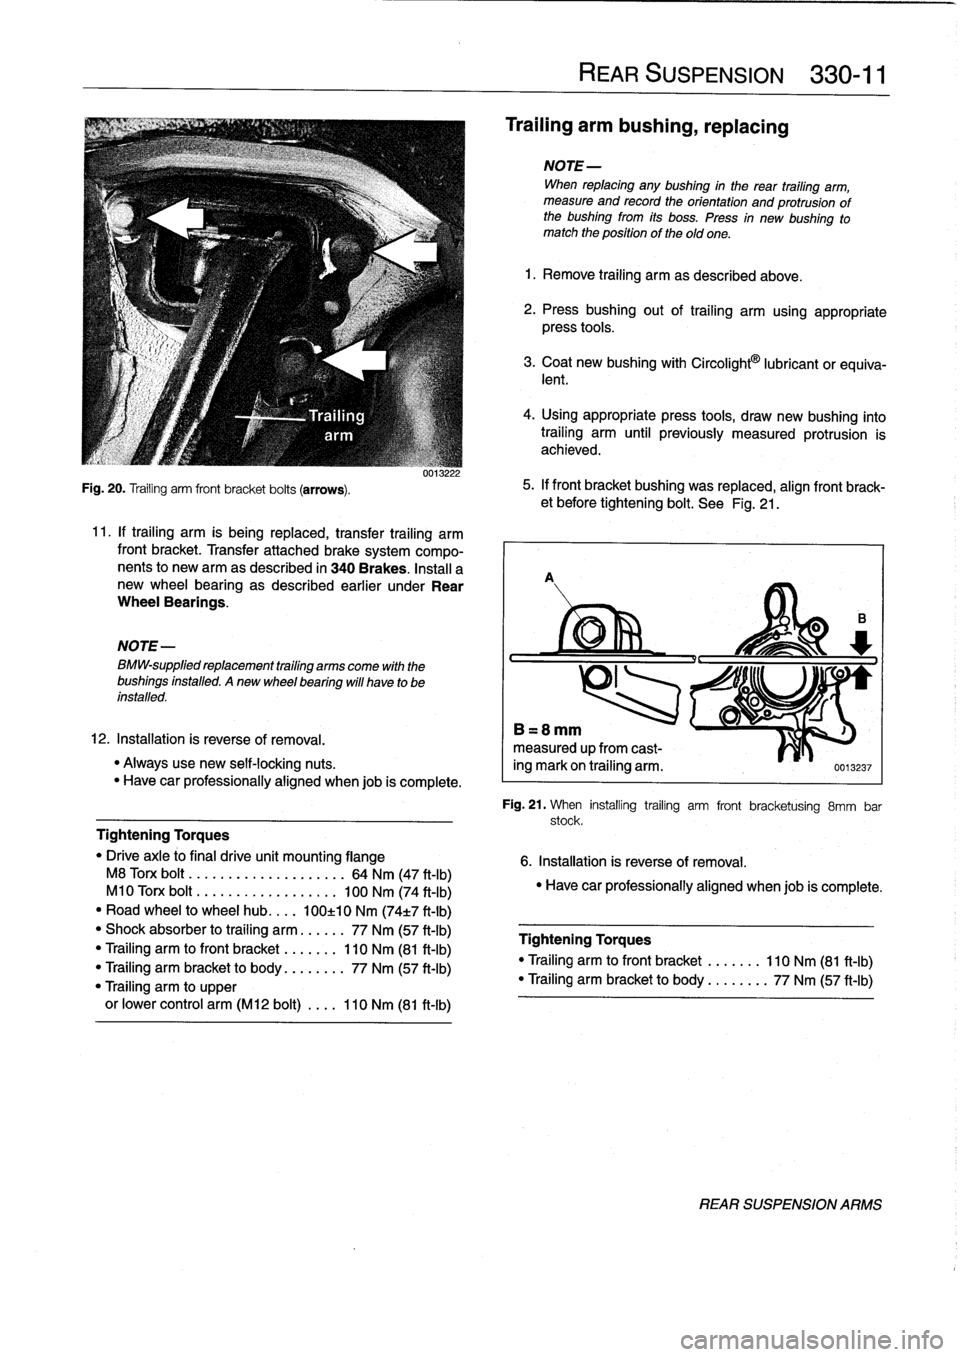 BMW 323i 1995 E36 Owners Manual 
Fig
.
20
.
Trailing
arm
front
bracket
bolts
(arrows)
.

NOTE-

BMW-supplied
replacement
trailing
arms
come
with
the
bushings
installed
.
Anew
wheel
bearing
will
have
to
be
installed
.

0013222

11
.
